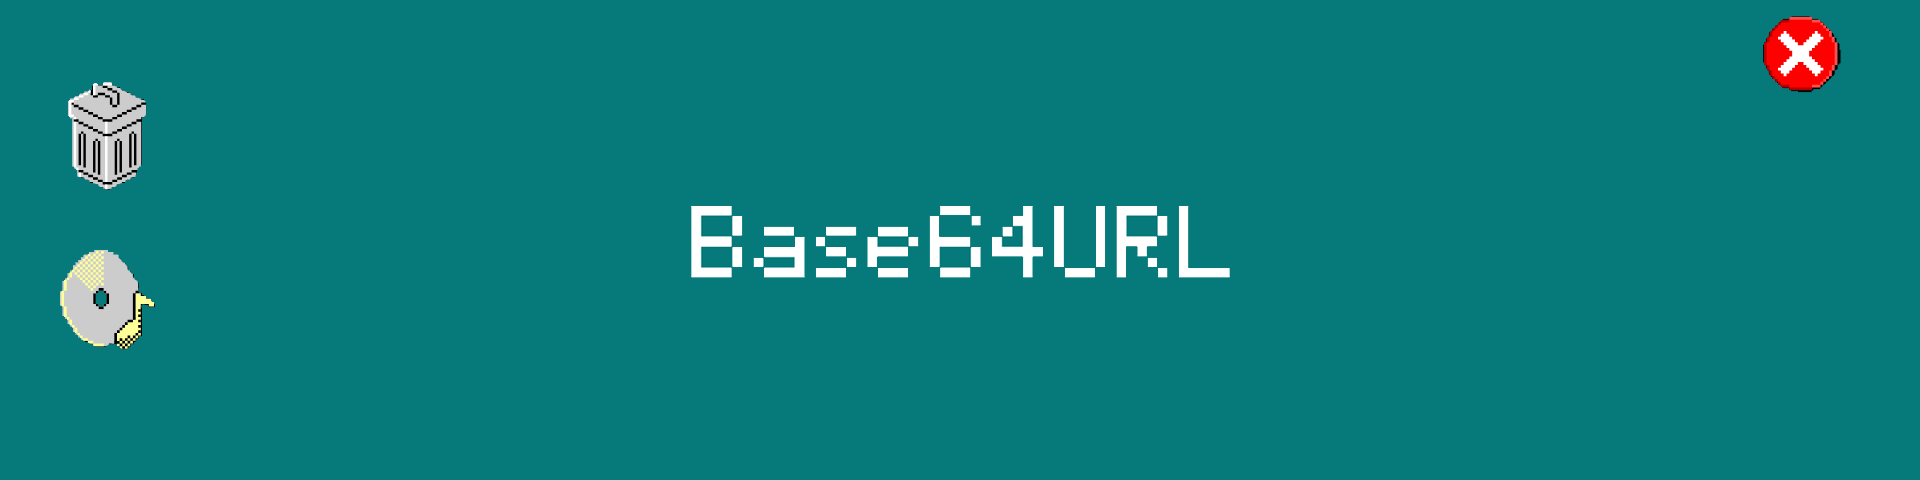 In this tutorial we’ll explore Base64URL encoding, its purpose, features and how it differs from regular Base64 encoding. Tailored for online and URL use, Base64URL overcomes the limitations of its regular counterpart. We’ll delve into the details of this encoding scheme, including its character set and padding technique. By the end of this article, you will have a thorough understanding of Base64URL encoding and how to implement it in your programming language.